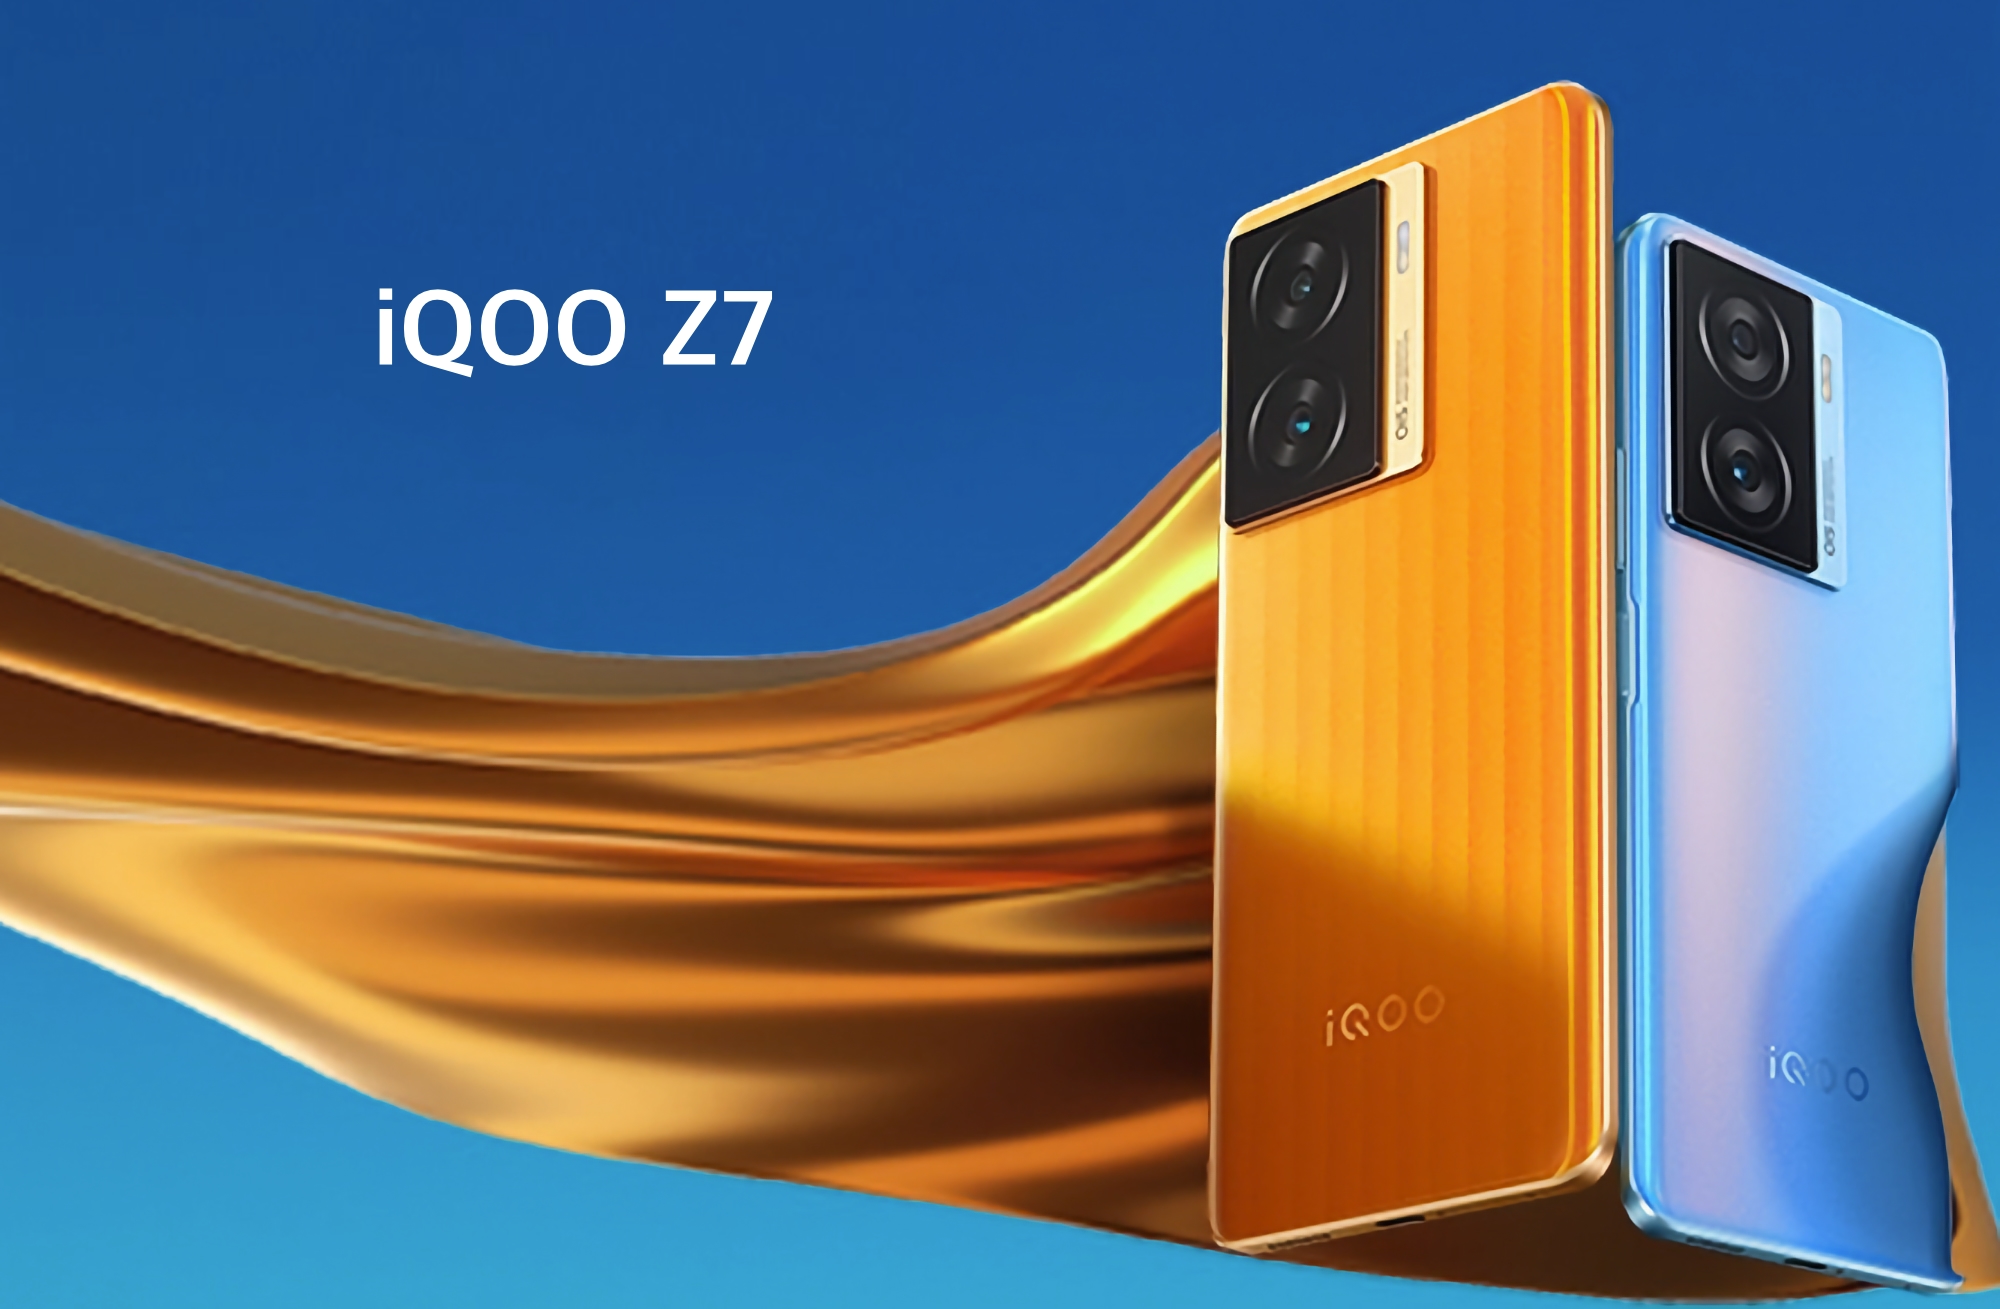 iQOO Z7: 120Hz LCD display, Snapdragon 782G chip, 5000mAh battery and 120W charger for $232